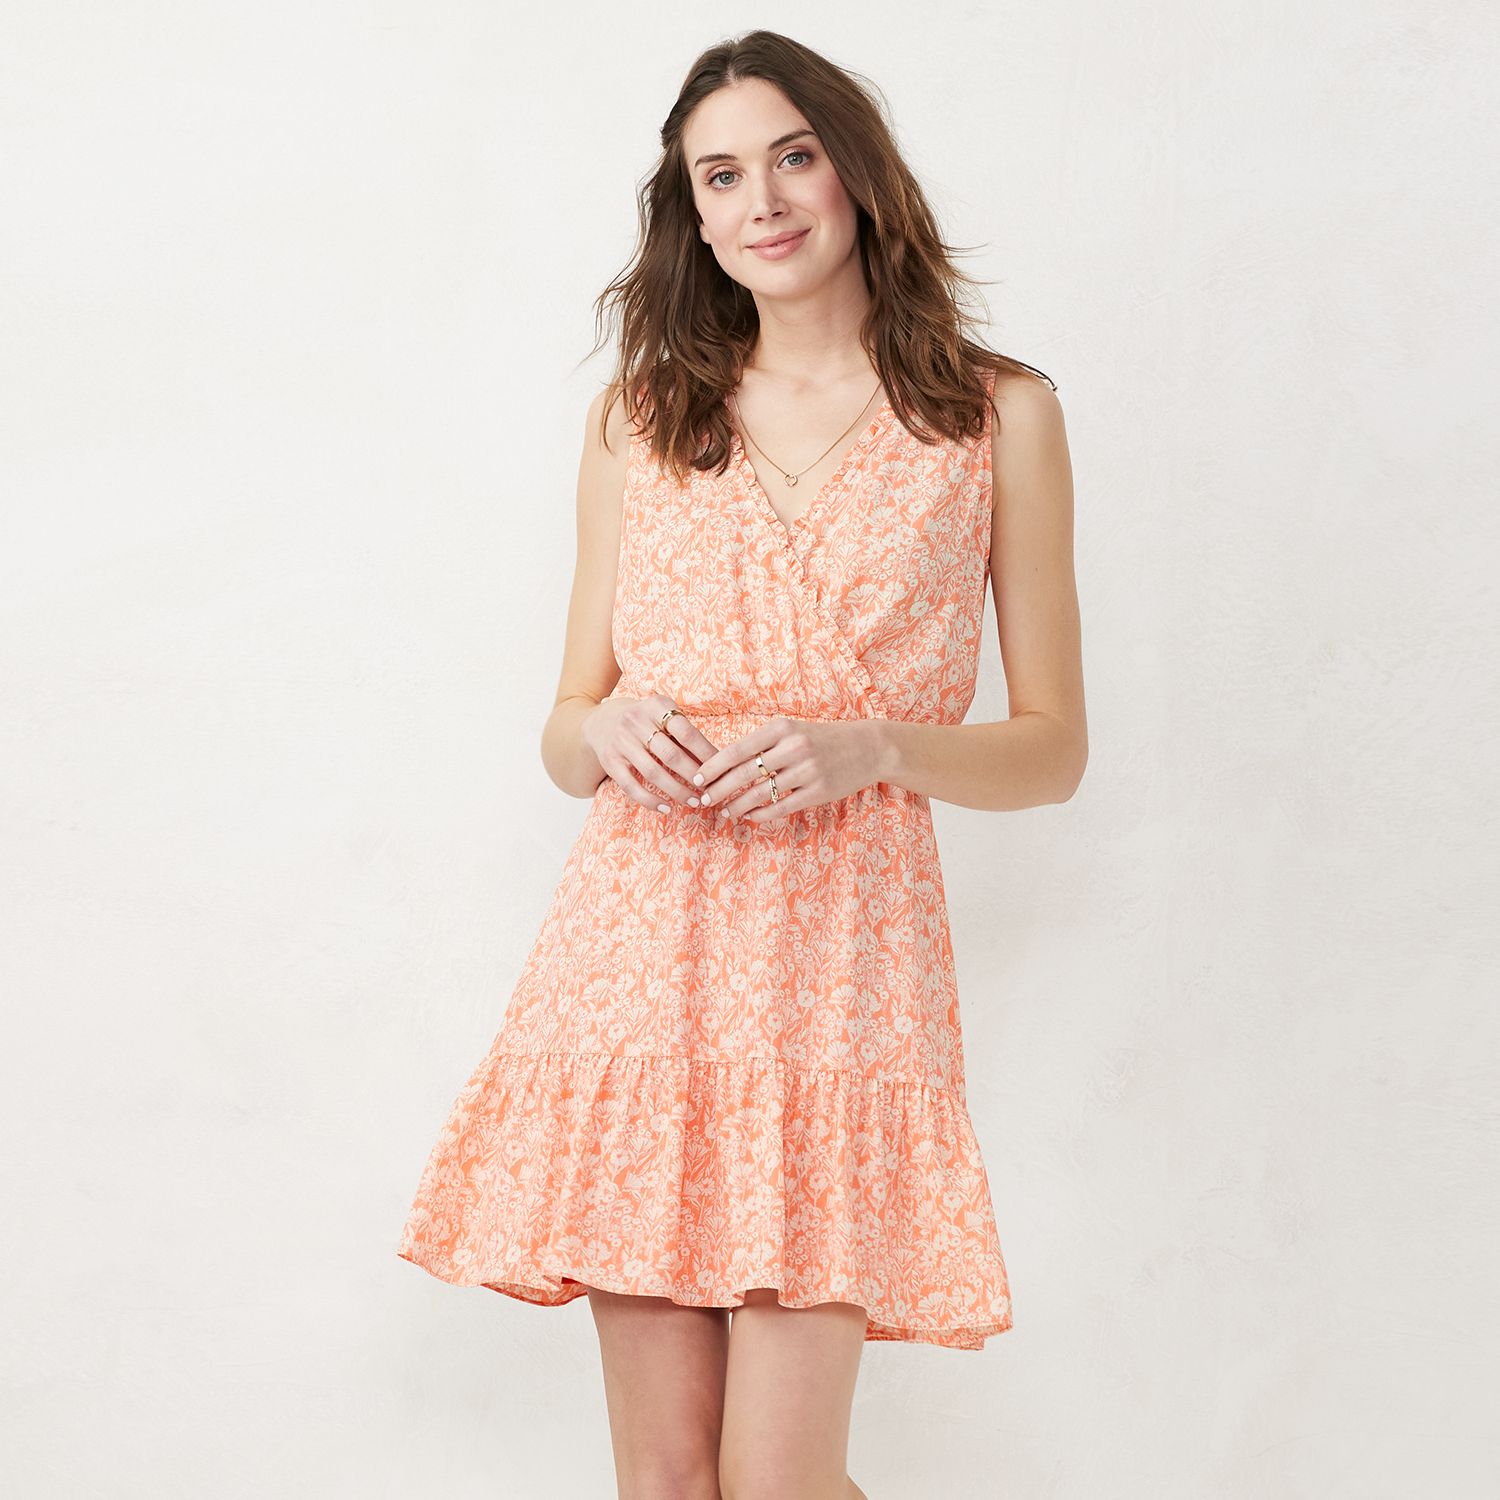 Image for LC Lauren Conrad Women's Sleeveless Faux-Wrap Dress at Kohl's.